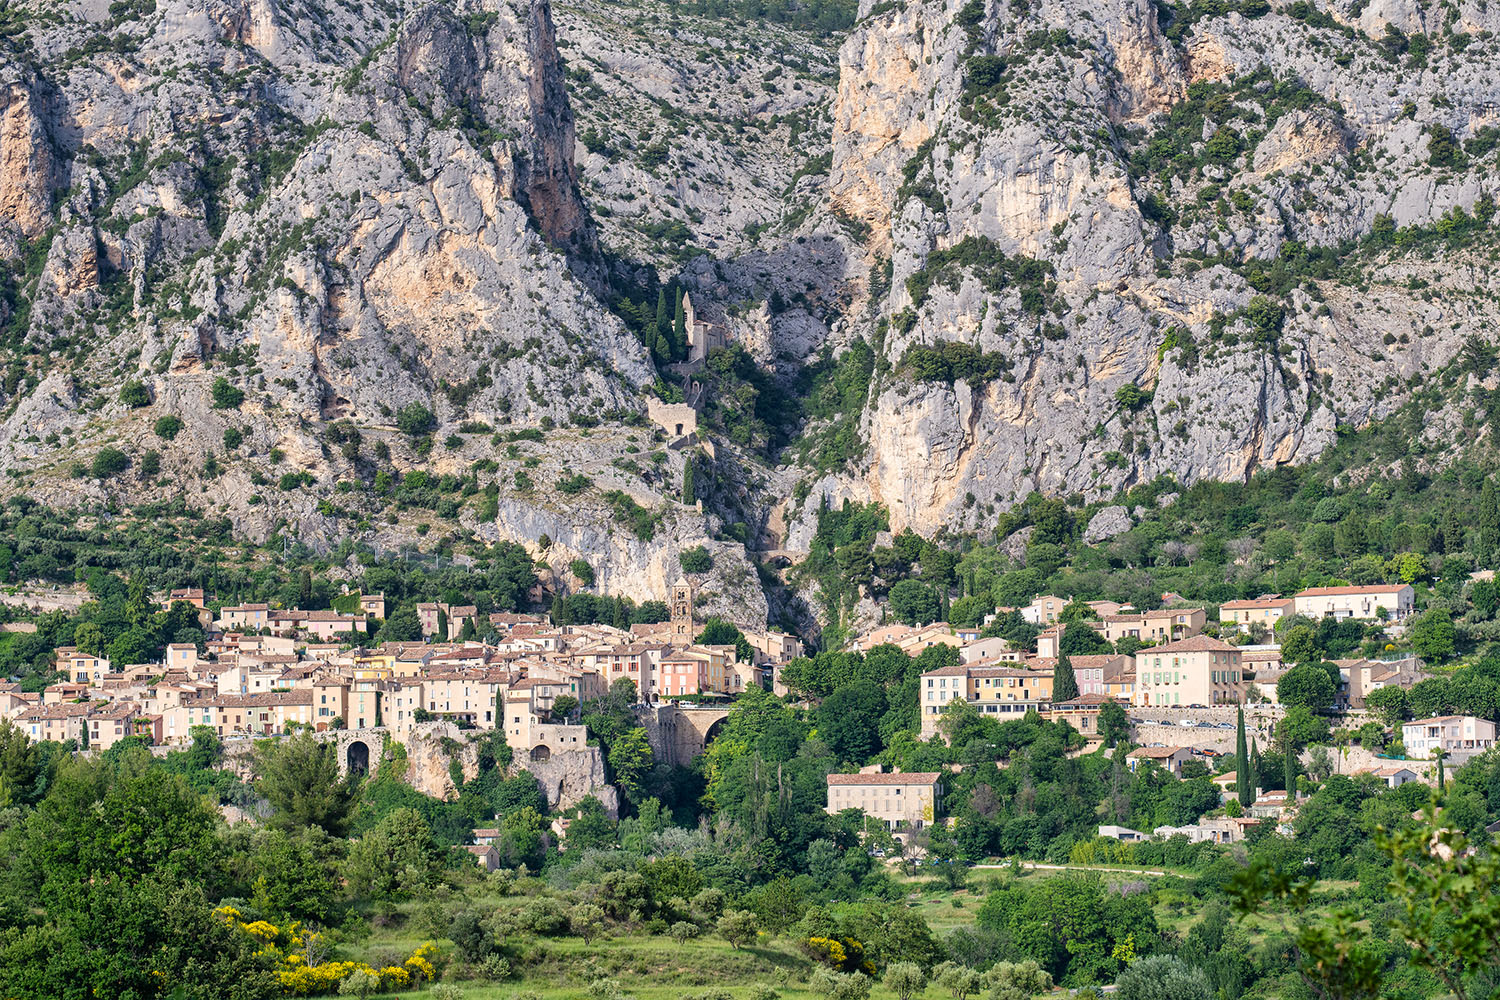 The village of Moustiers-Sainte-Marie photographed from across the valley